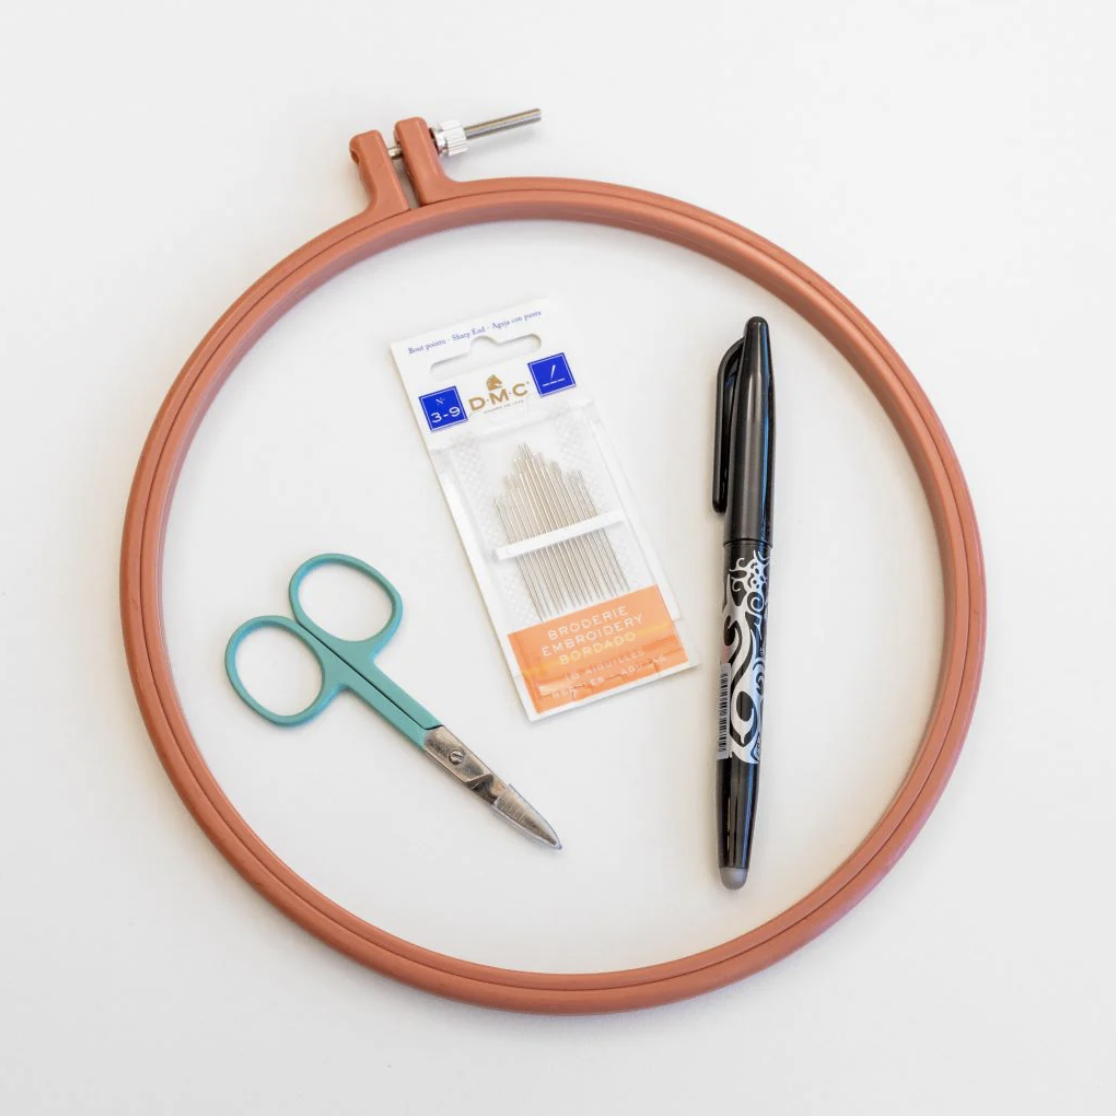 This image shows some embroidery supplies from the Embroidery Beginner's Bundle, available for purchase from the Clever Poppy Shop including Clever Poppy scissors, Mauve Rico Hoop, Pilot Frixion Pen, and DMC embroidery needles.